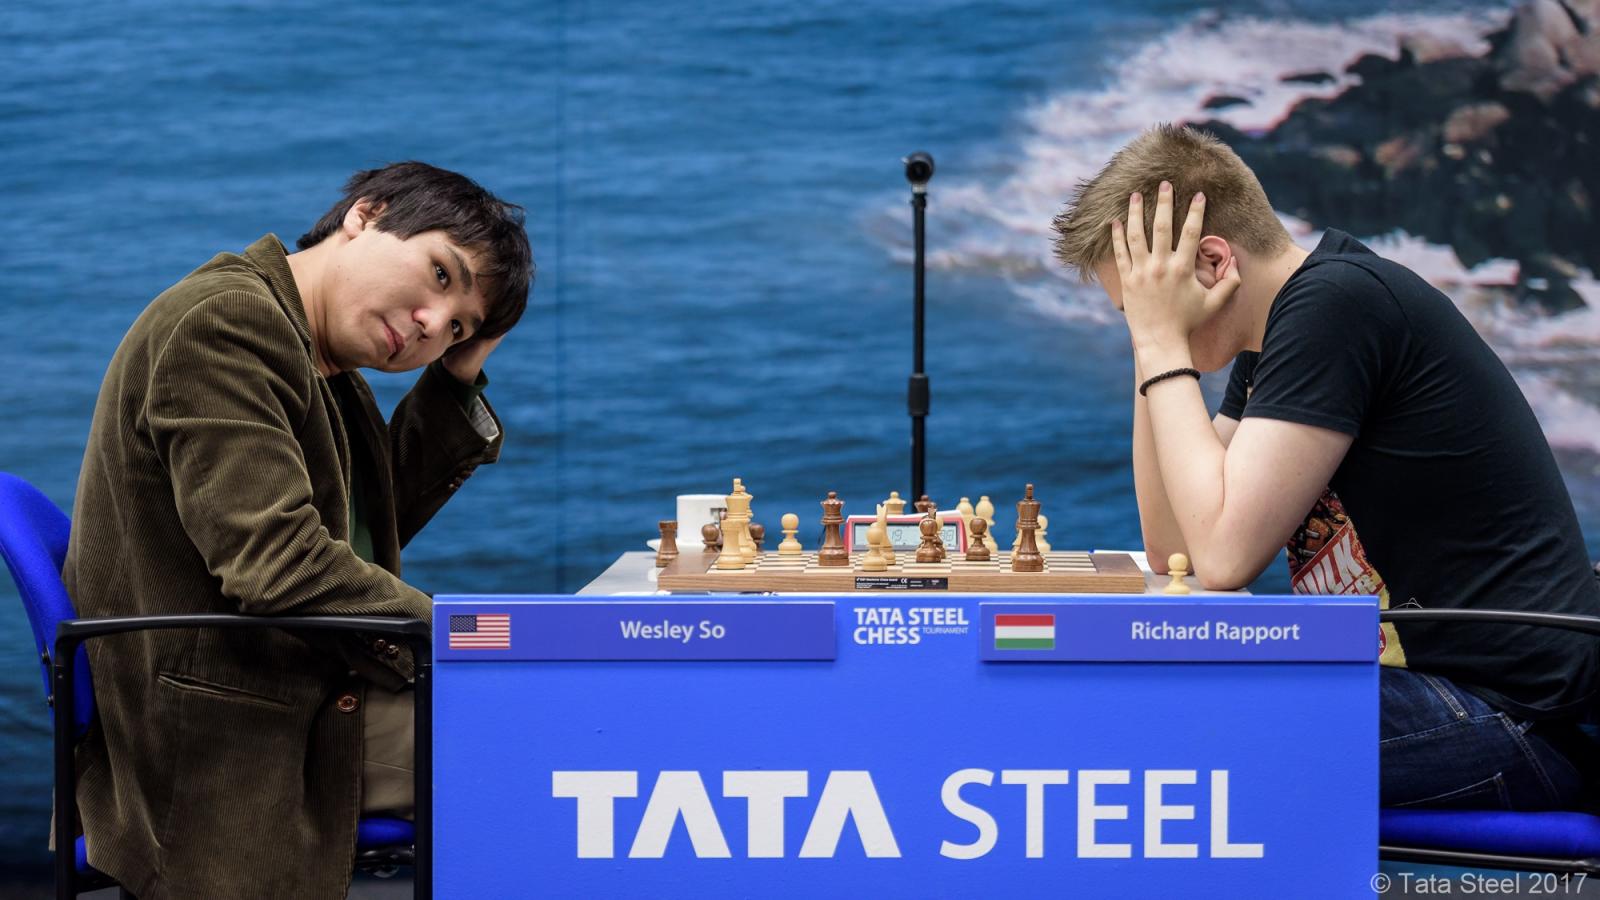 Lessons to be learned from Tata Steel Chess (Part 1)